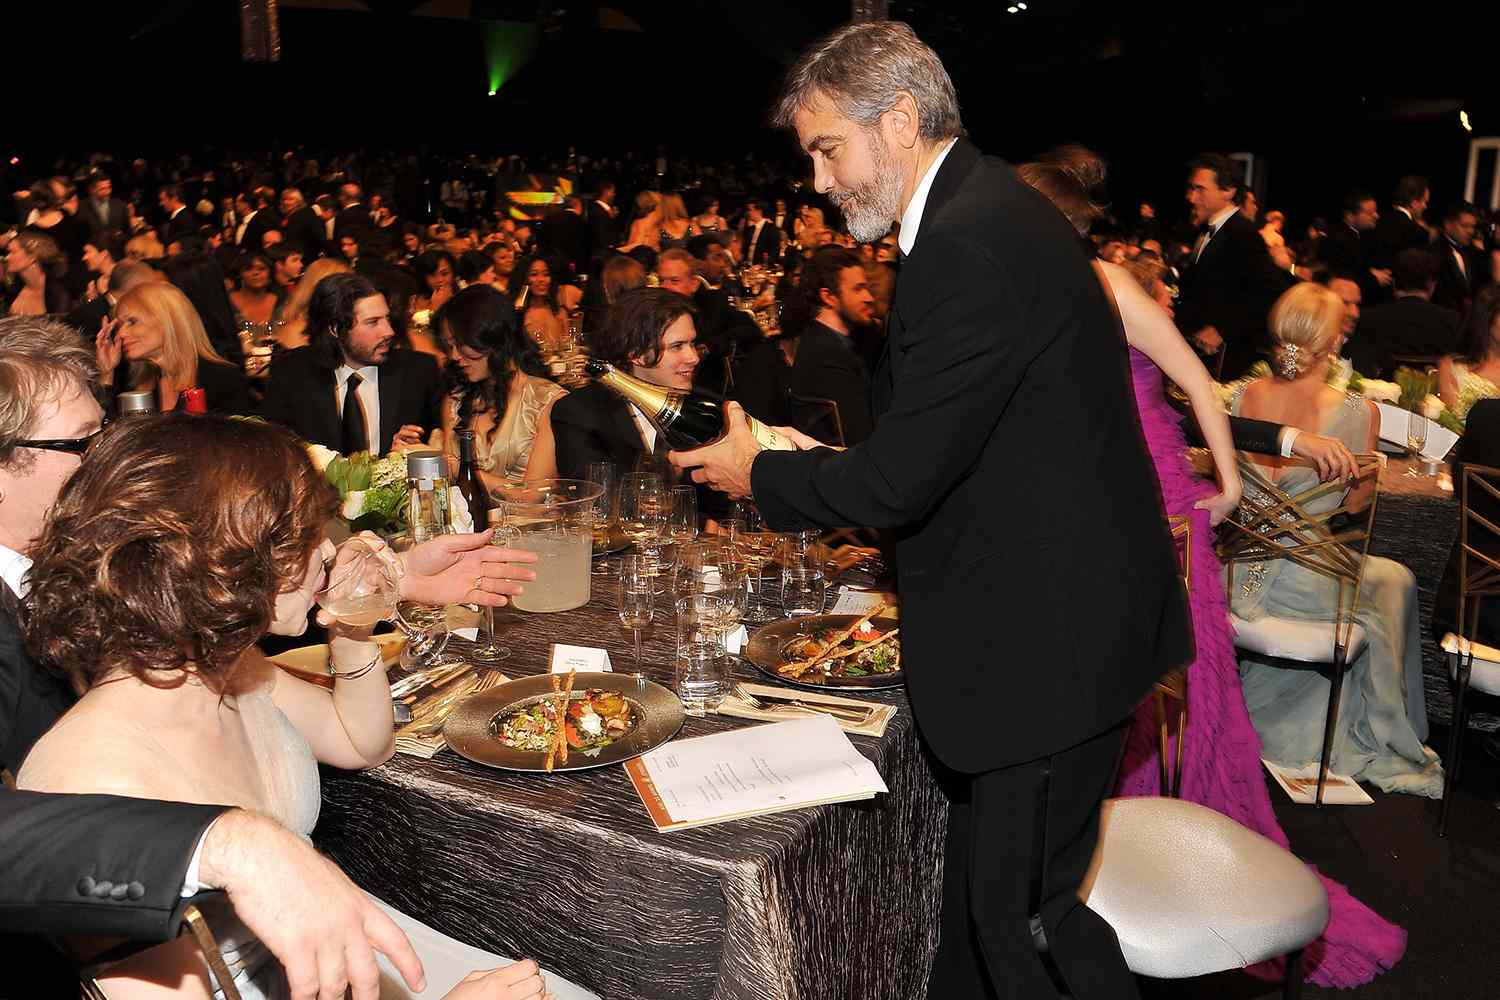 George Clooney attends the TNT/TBS broadcast of the 16th Annual Screen Actors Guild Awards at the Shrine Auditorium on January 23, 2010 in Los Angeles, California